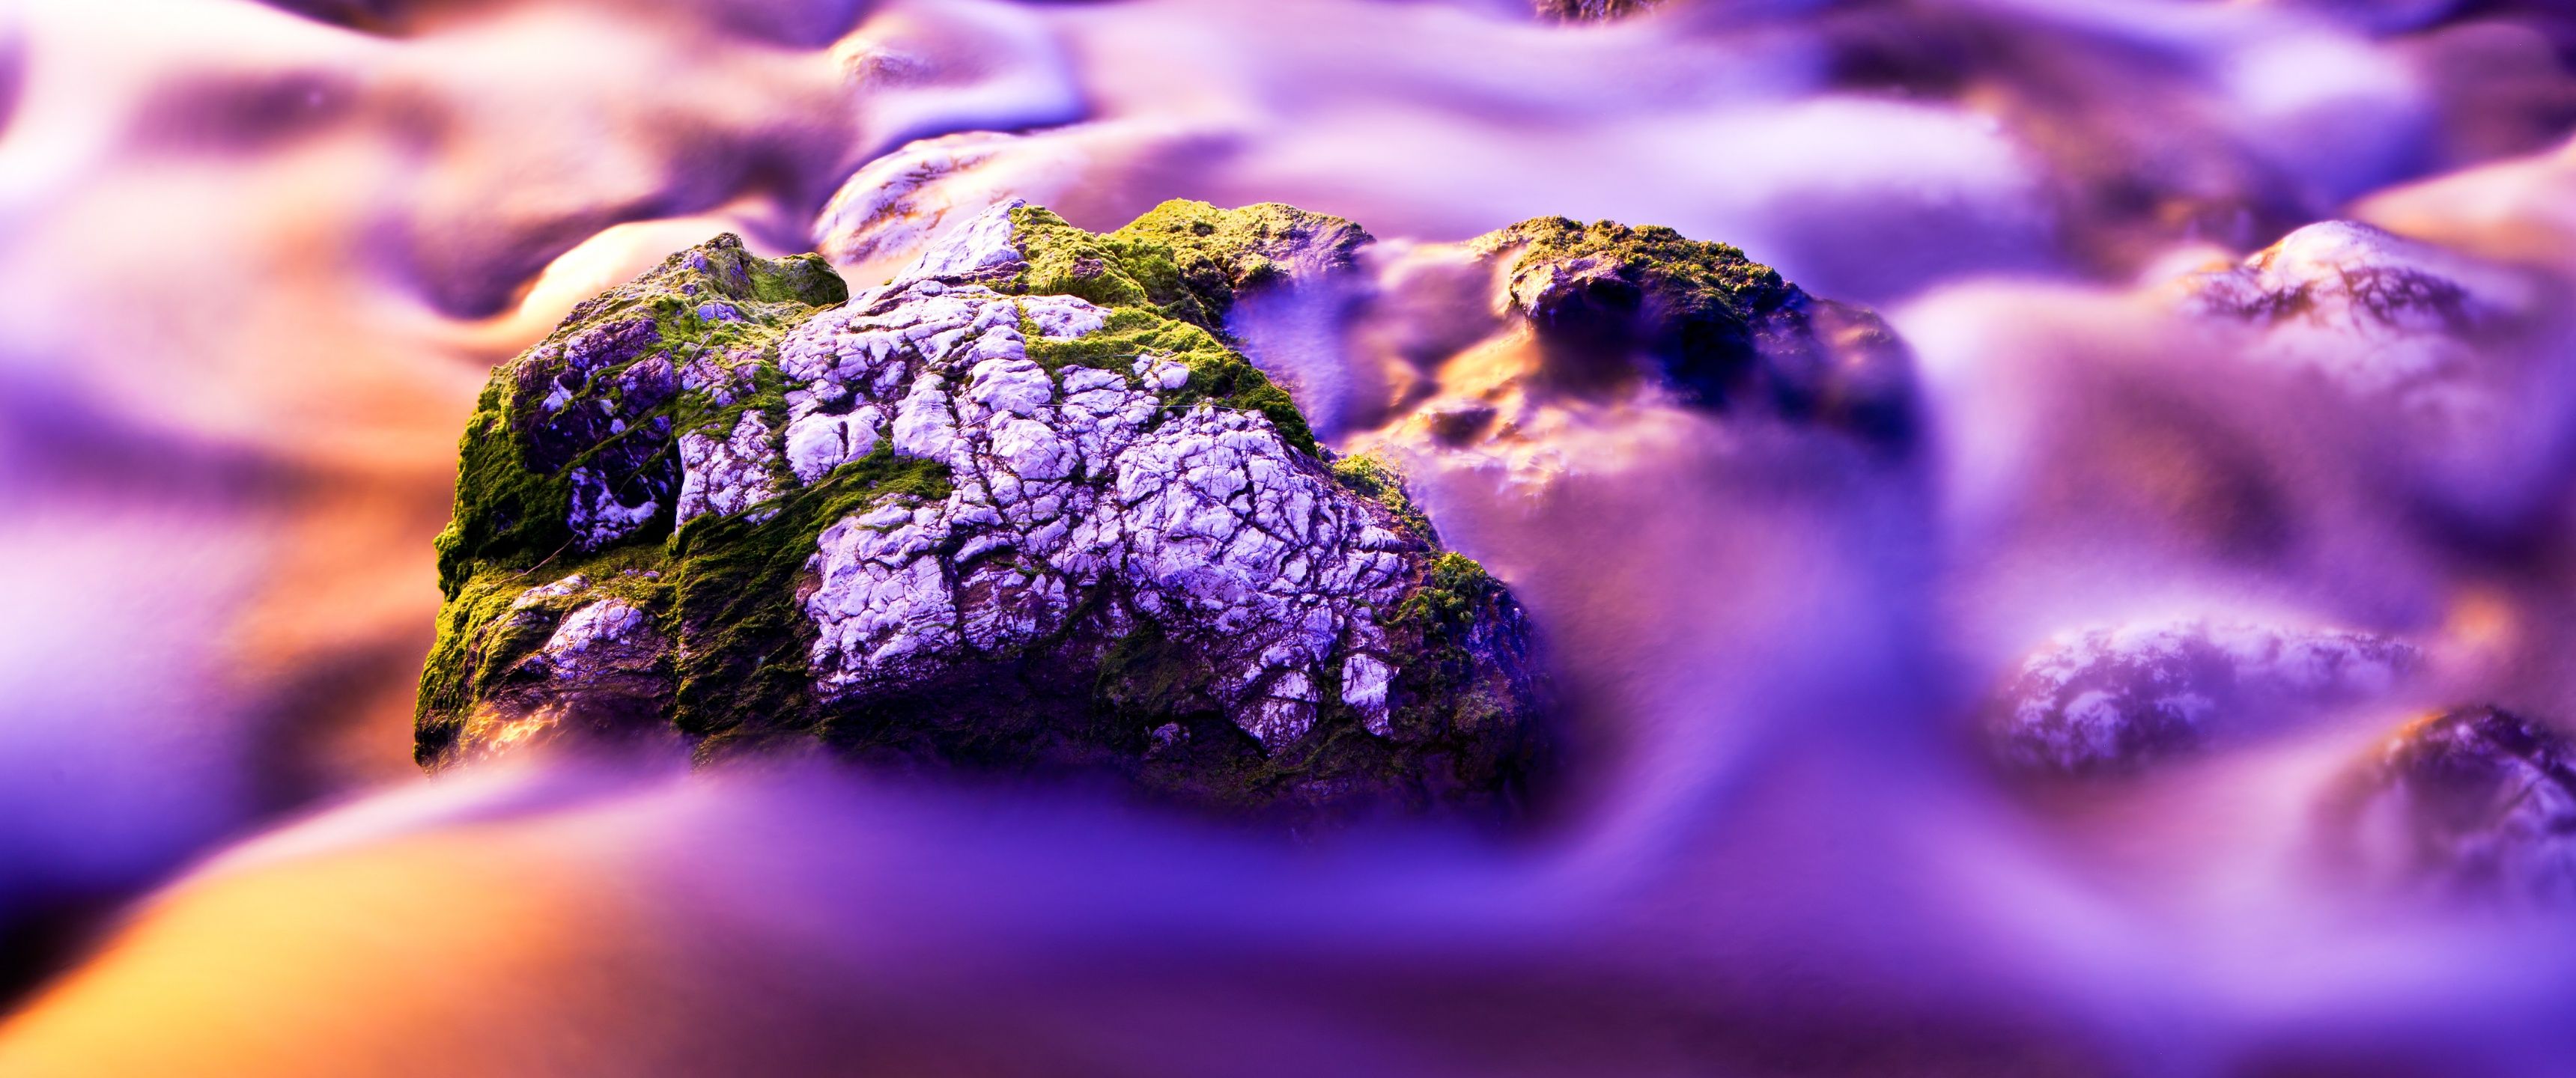 A close up of a rock covered in moss, surrounded by a blur of water. - 3440x1440, purple